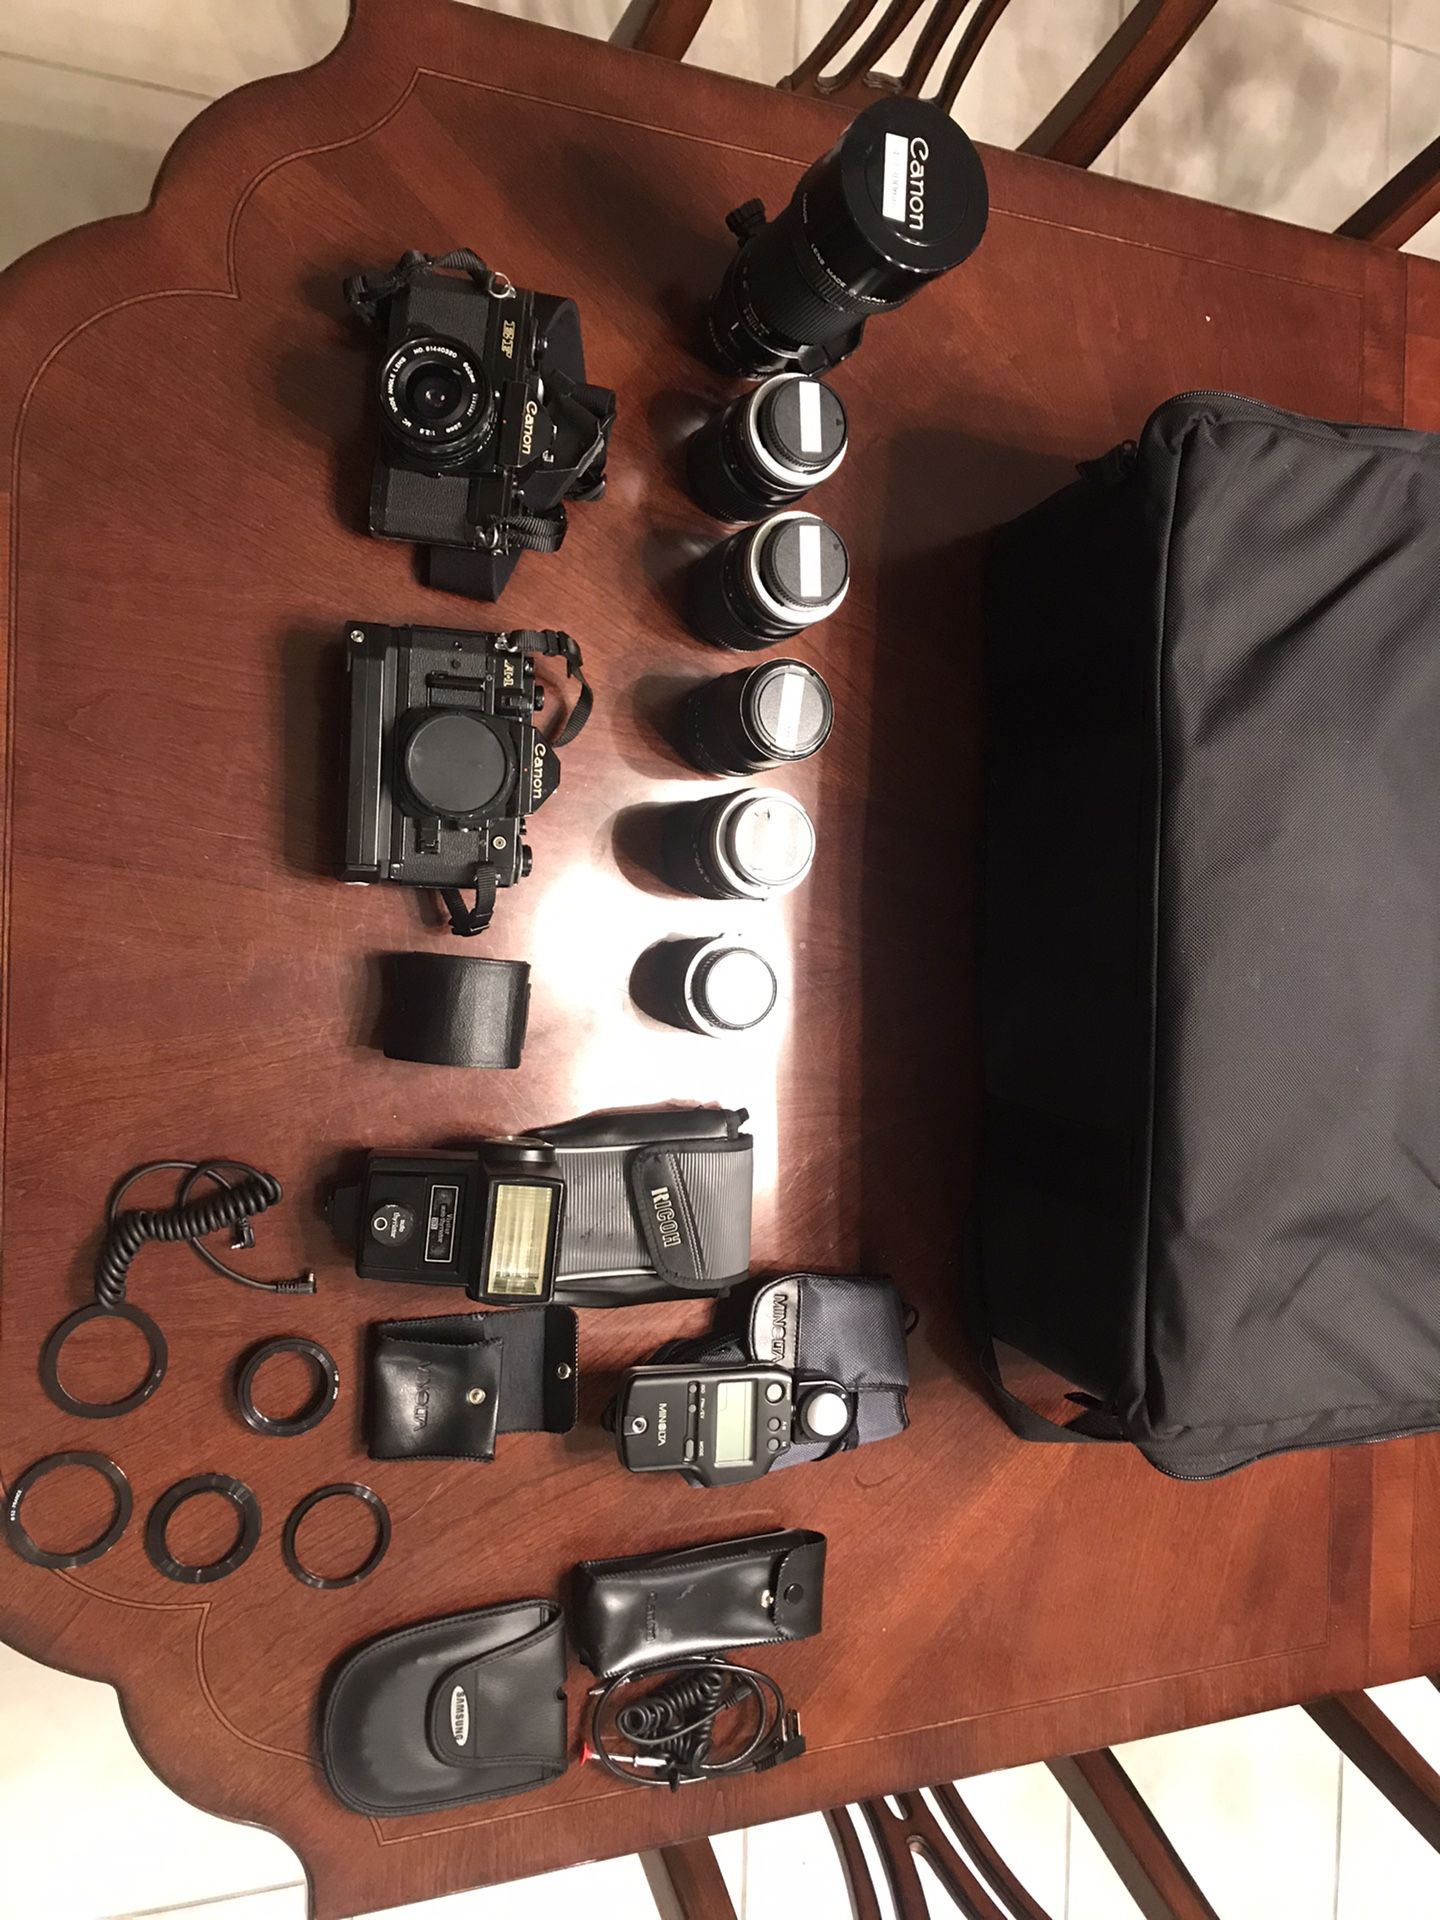 Canon cameras with asst of lenses $250